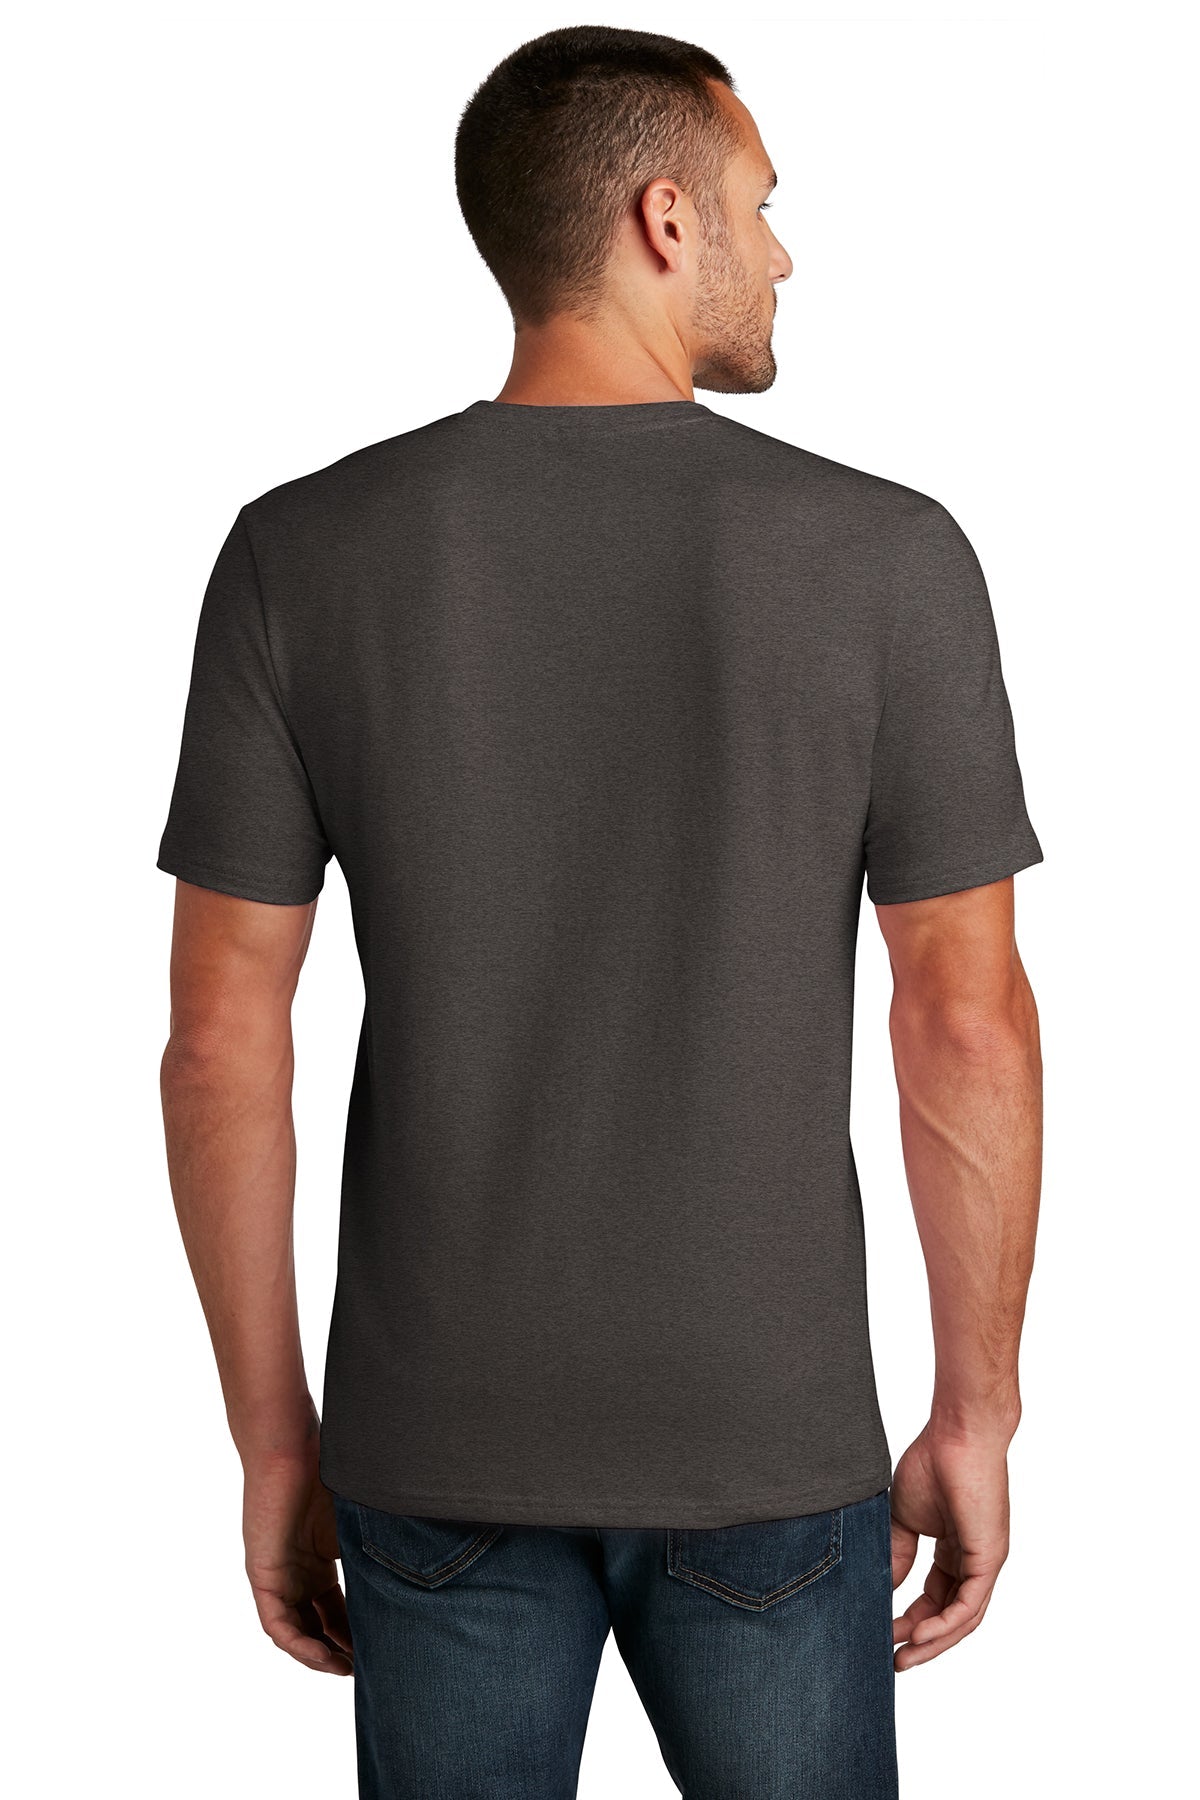 district flex tee dt7500 heathered charcoal